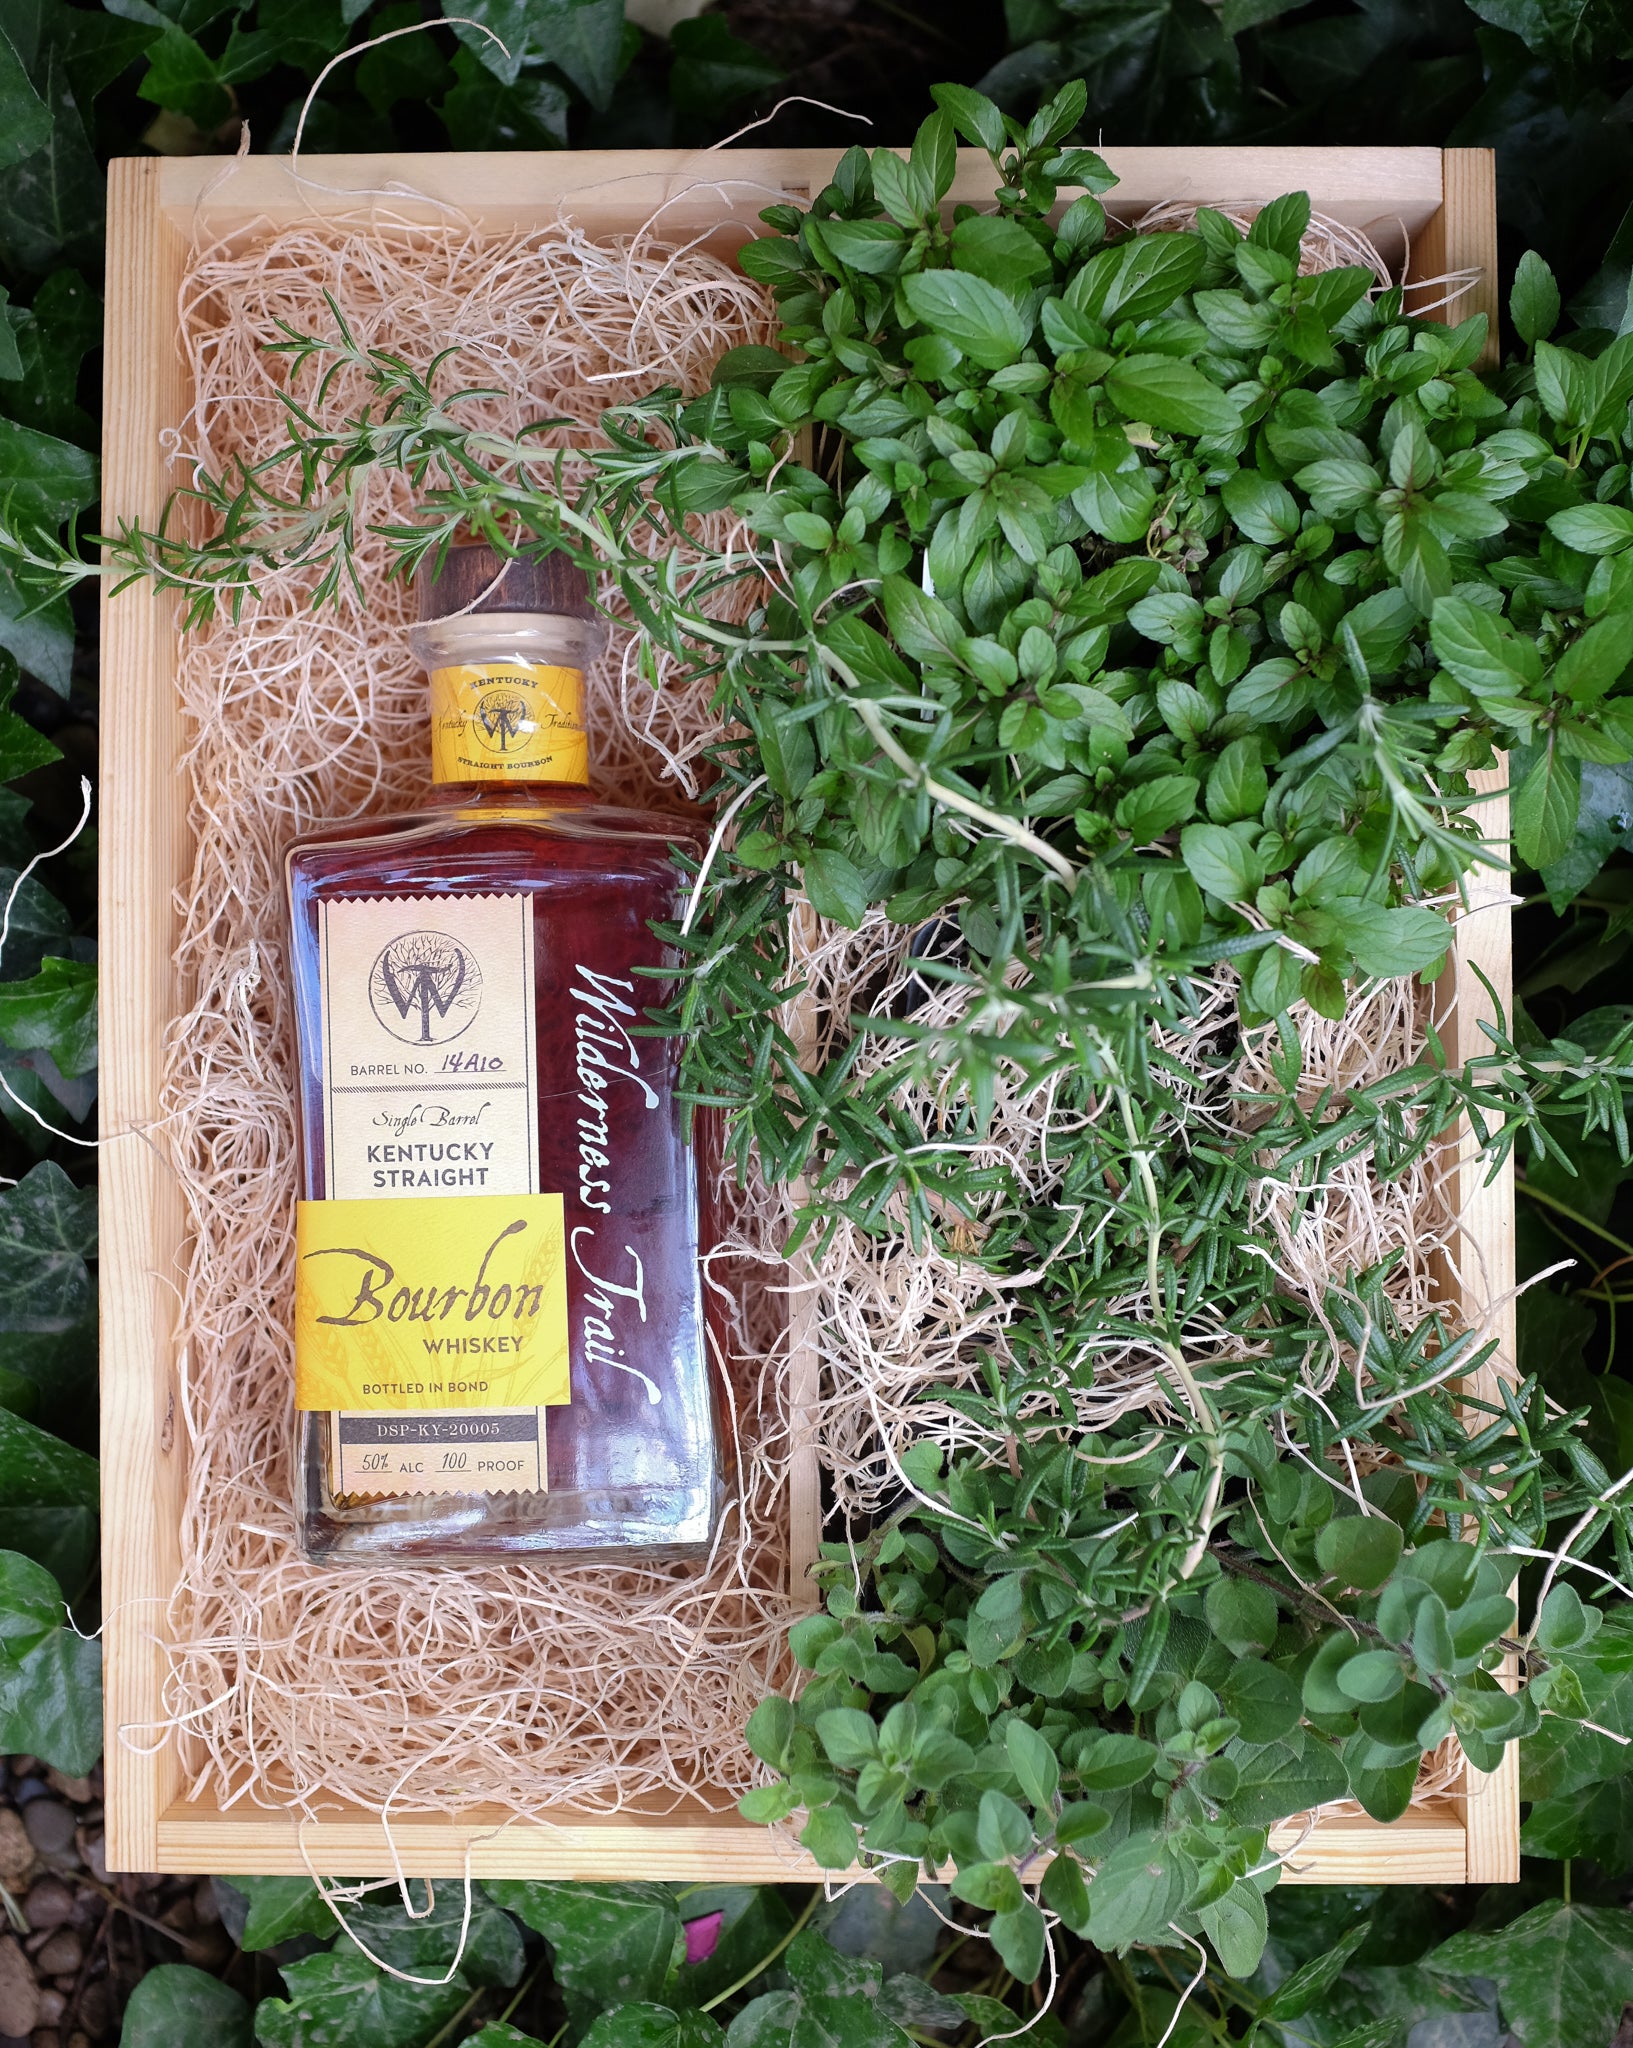 Wilderness Trail Bourbon Crate with rosemary and mint herb plants